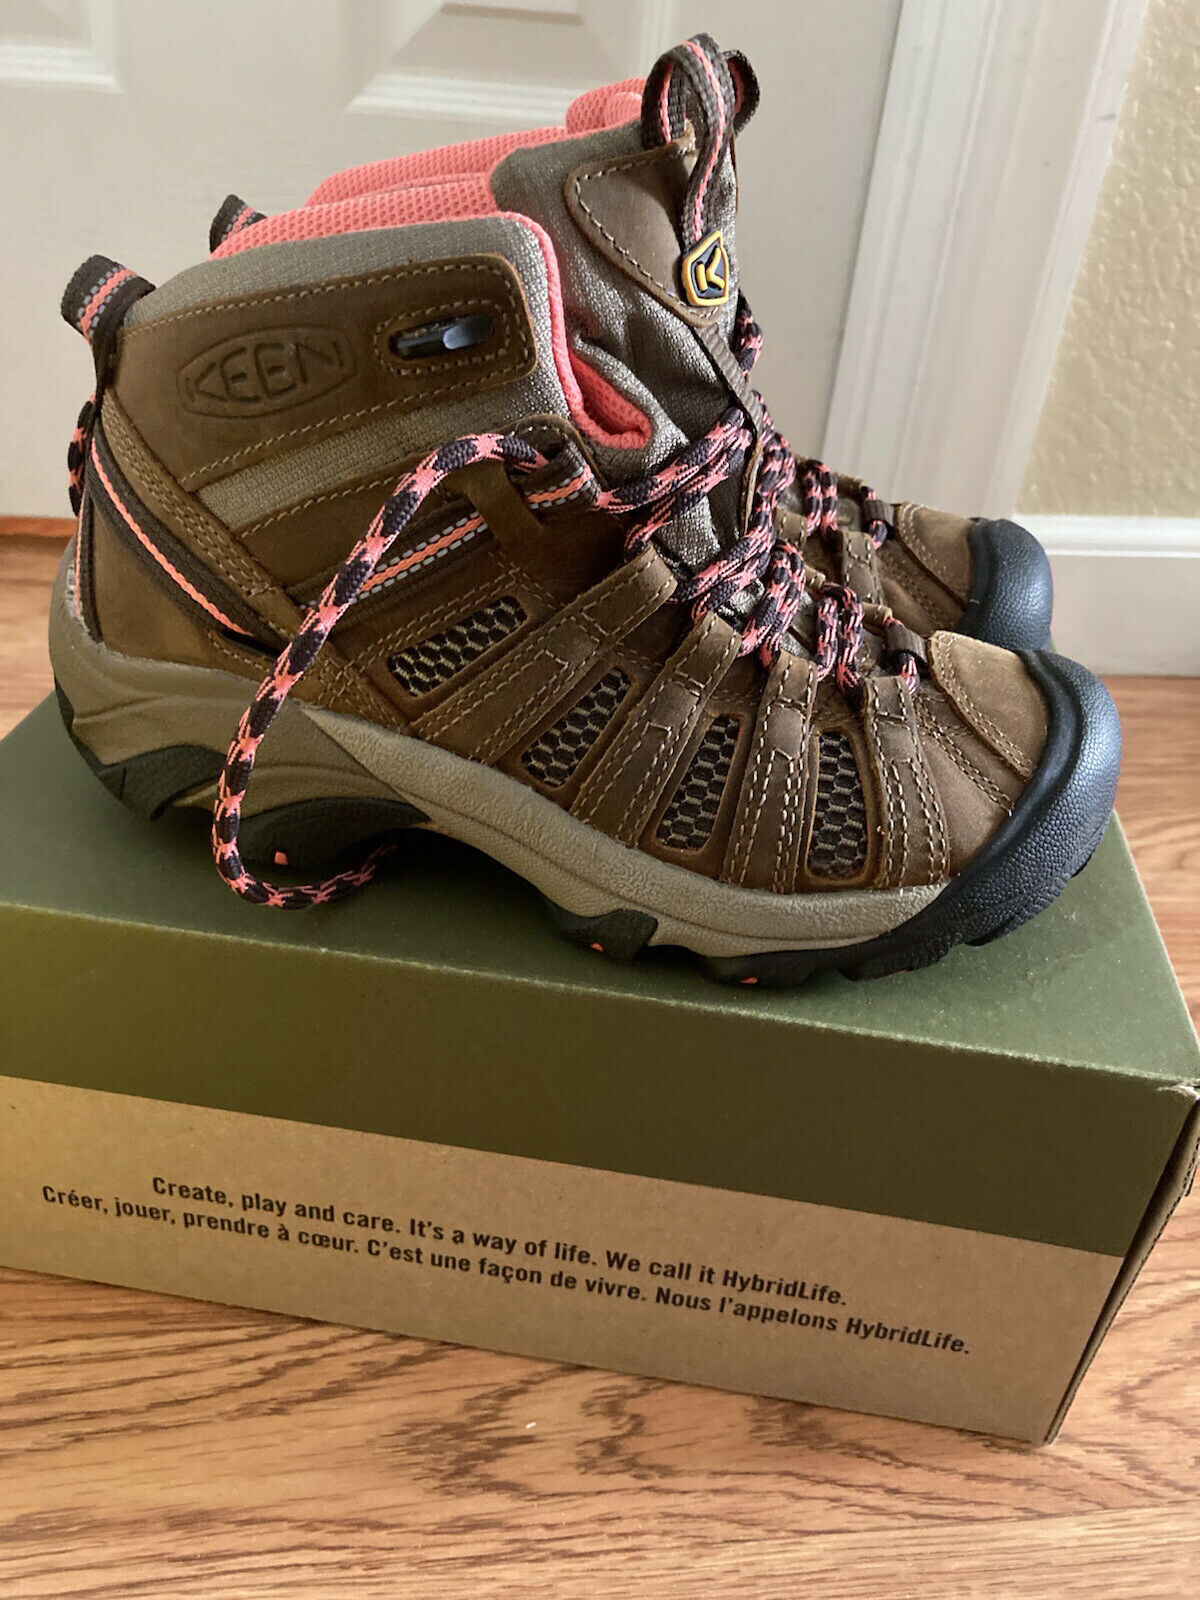 Keen Womens Voyager Mid Hiking Boots sz 5 1/2 Brown NWB